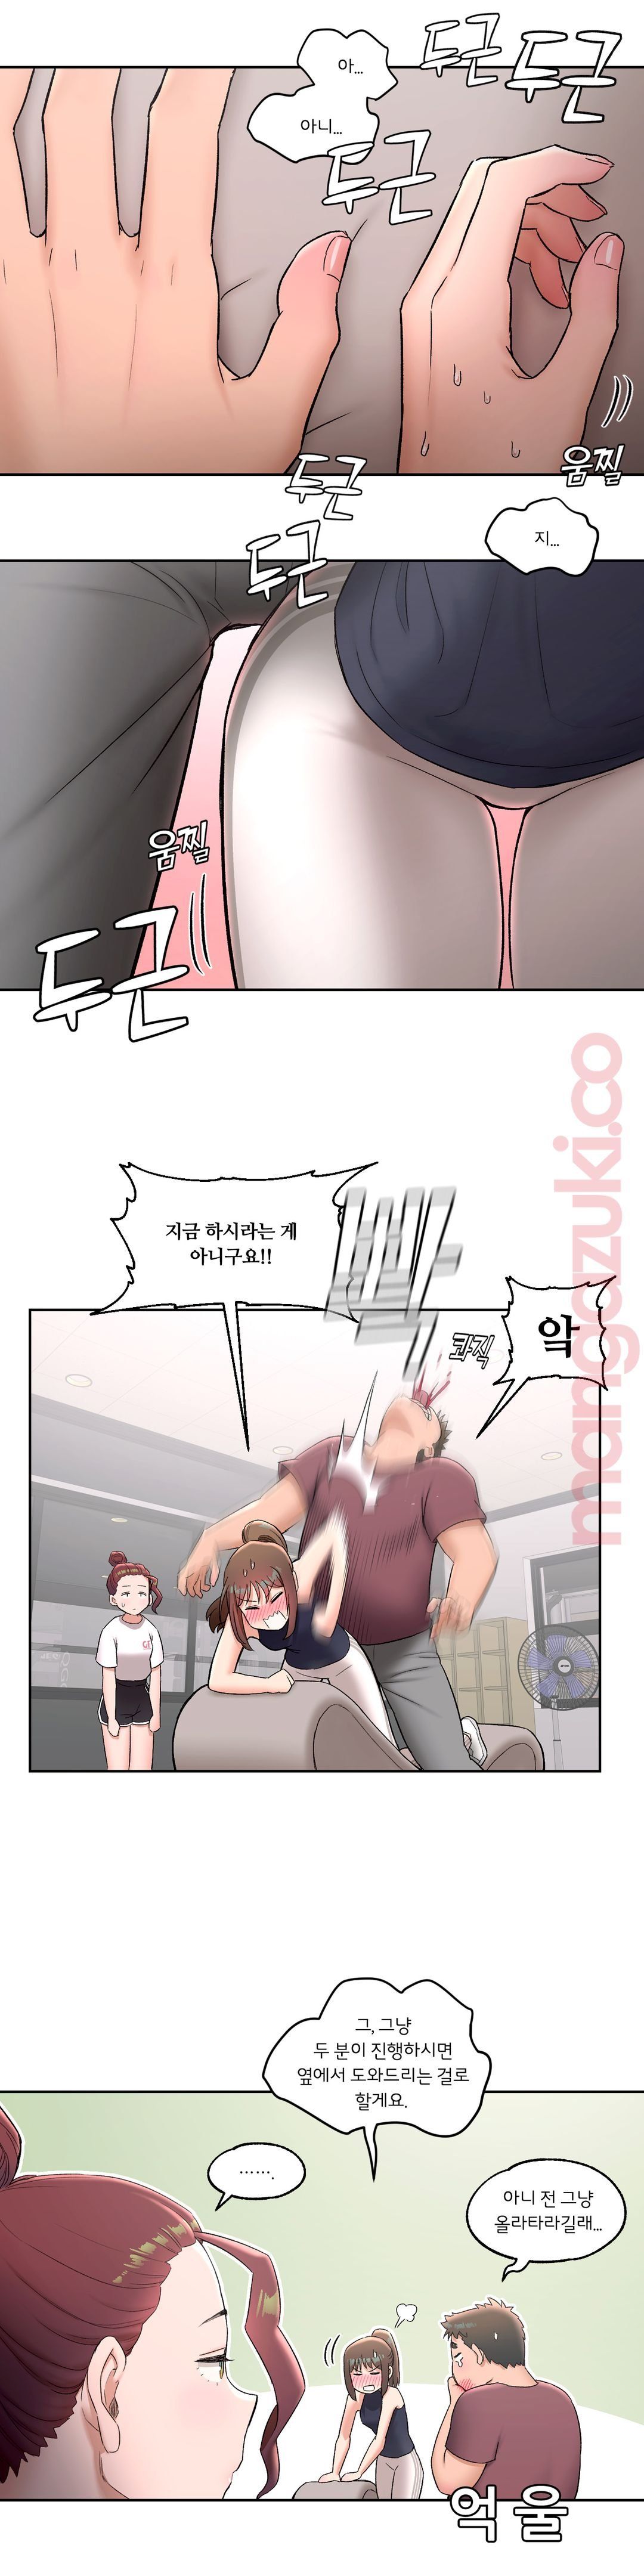 Sexercise Raw - Chapter 42 Page 6